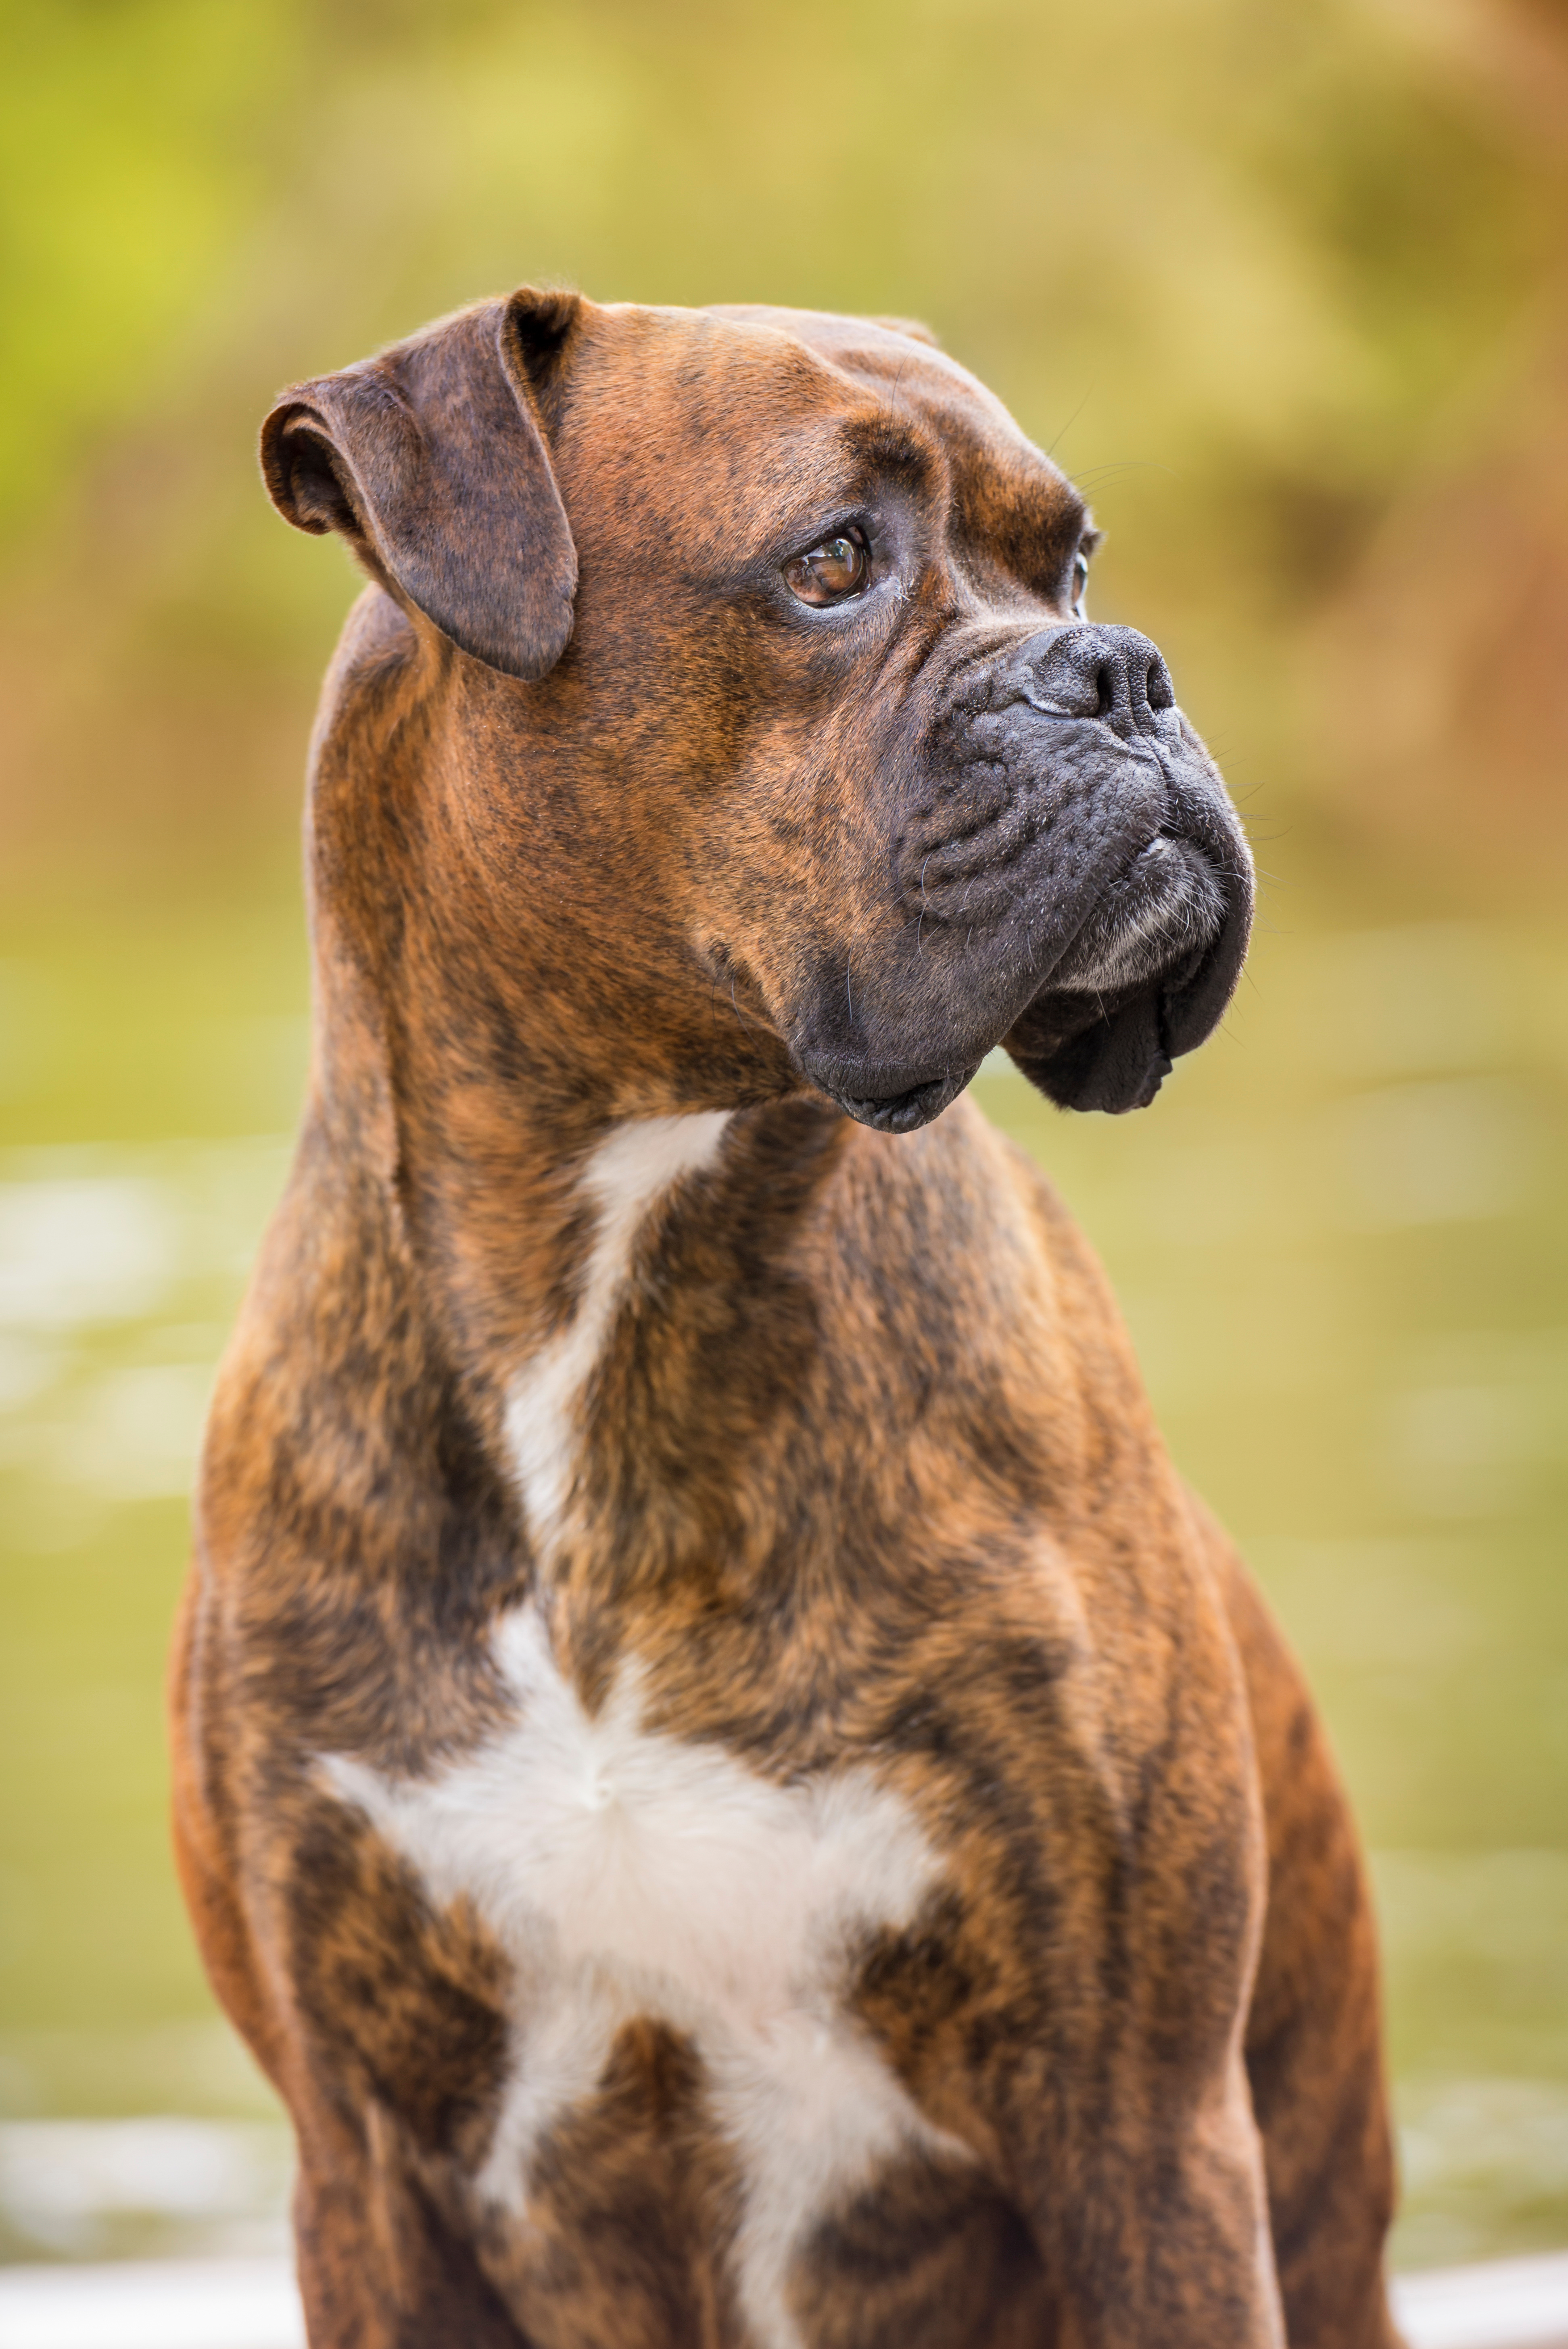 A trained boxer dog - Dog Training Elite of Indianapolis is the best choice for boxer dog training in Indianapolis, IN!